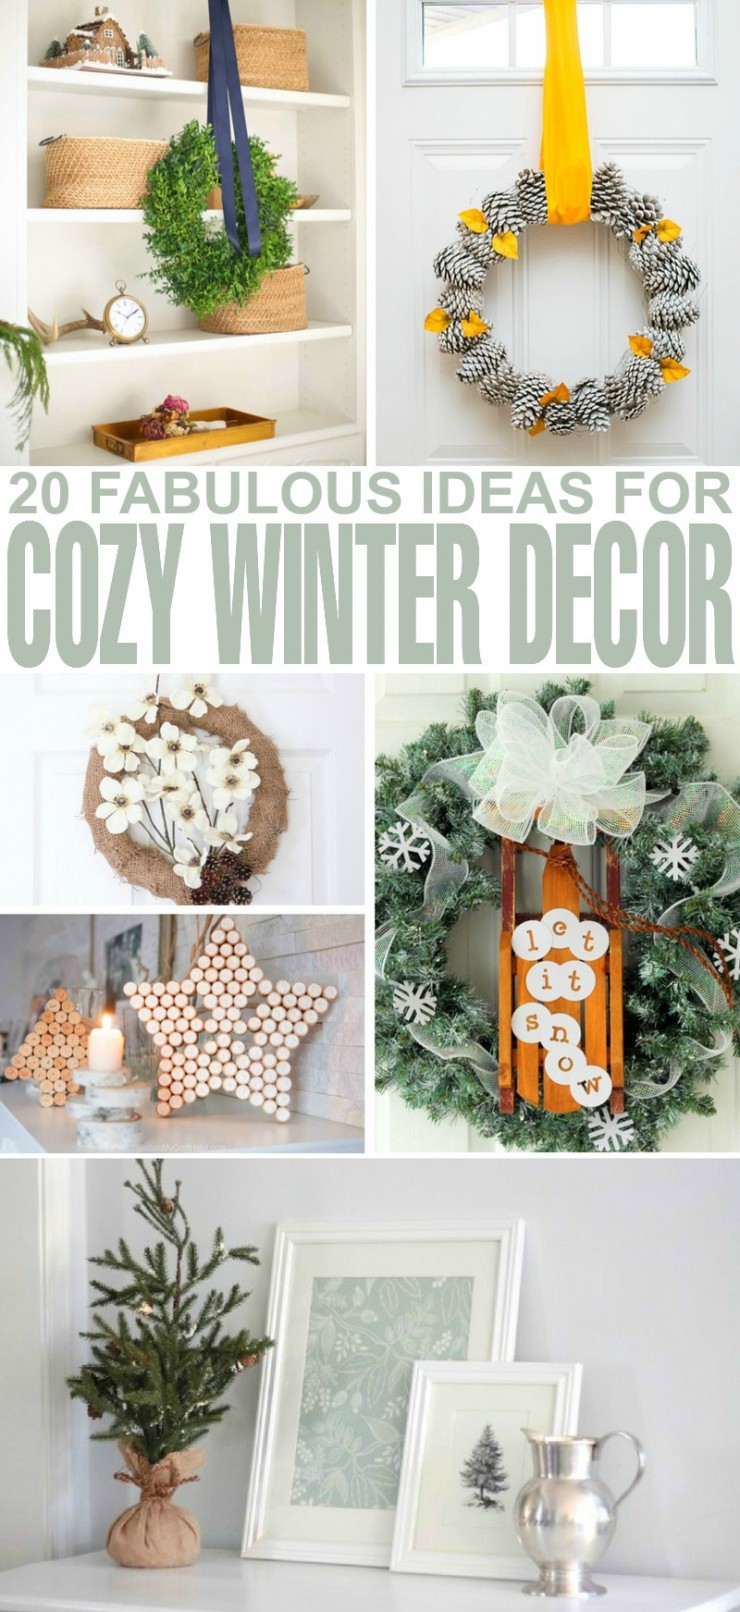 From beautiful centrepieces and creative mantels to unique wreaths and even winter planters, I'm sure these fabulous ideas for cozy winter décor will make the winter season both merry and bright. 